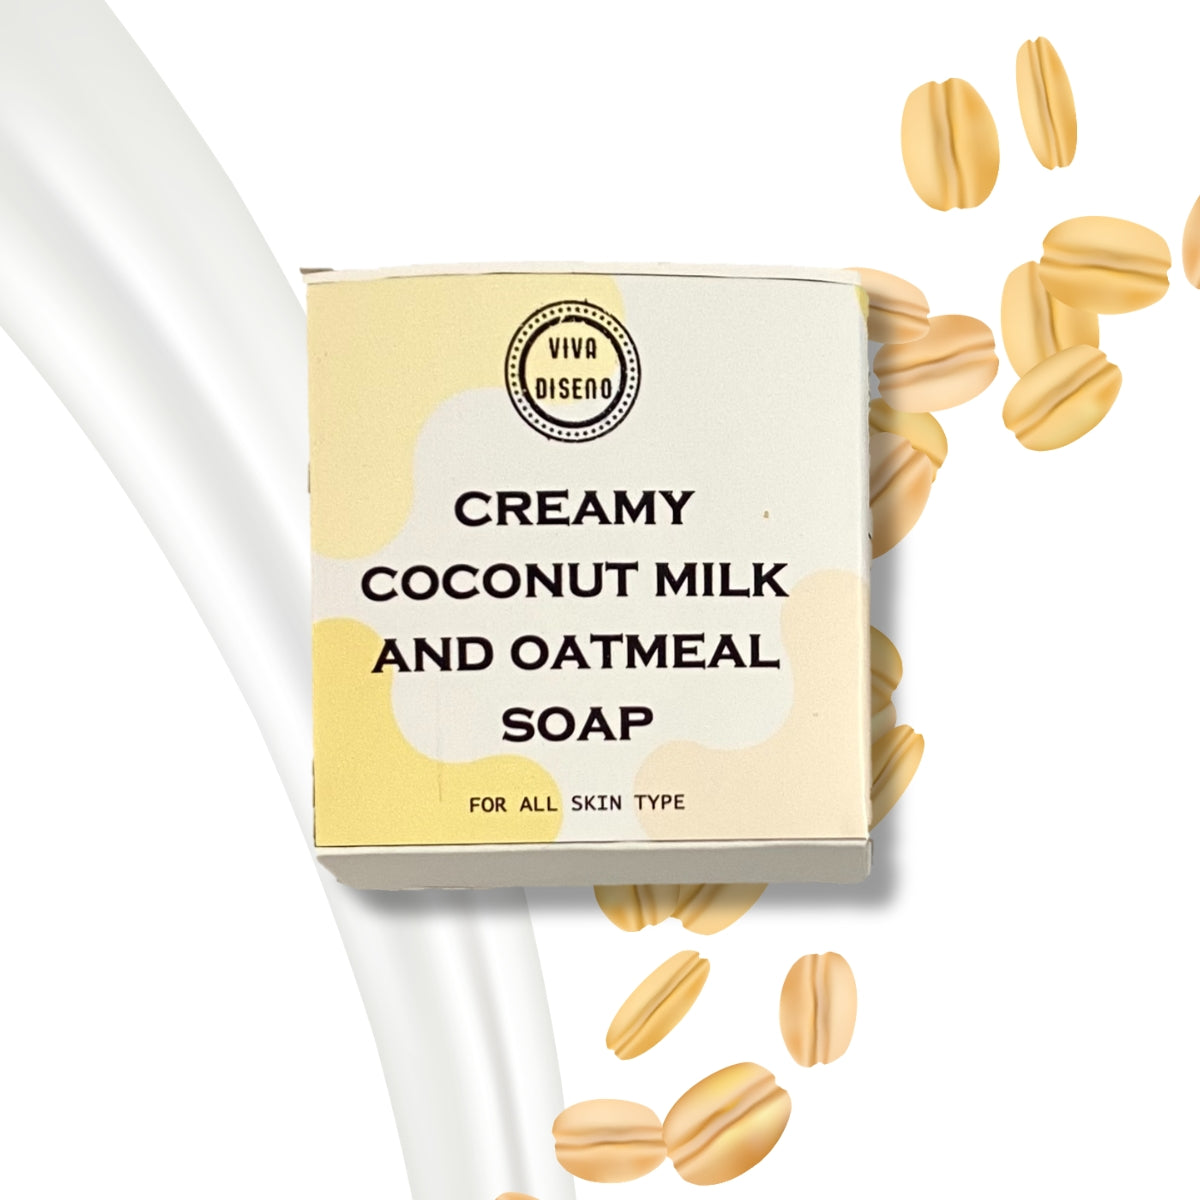 Tiarrah Creamy Coconut Milk and Oatmeal Soap: Natural, Organic, Non-Toxic - The Luxury Bath and Body Care Shop